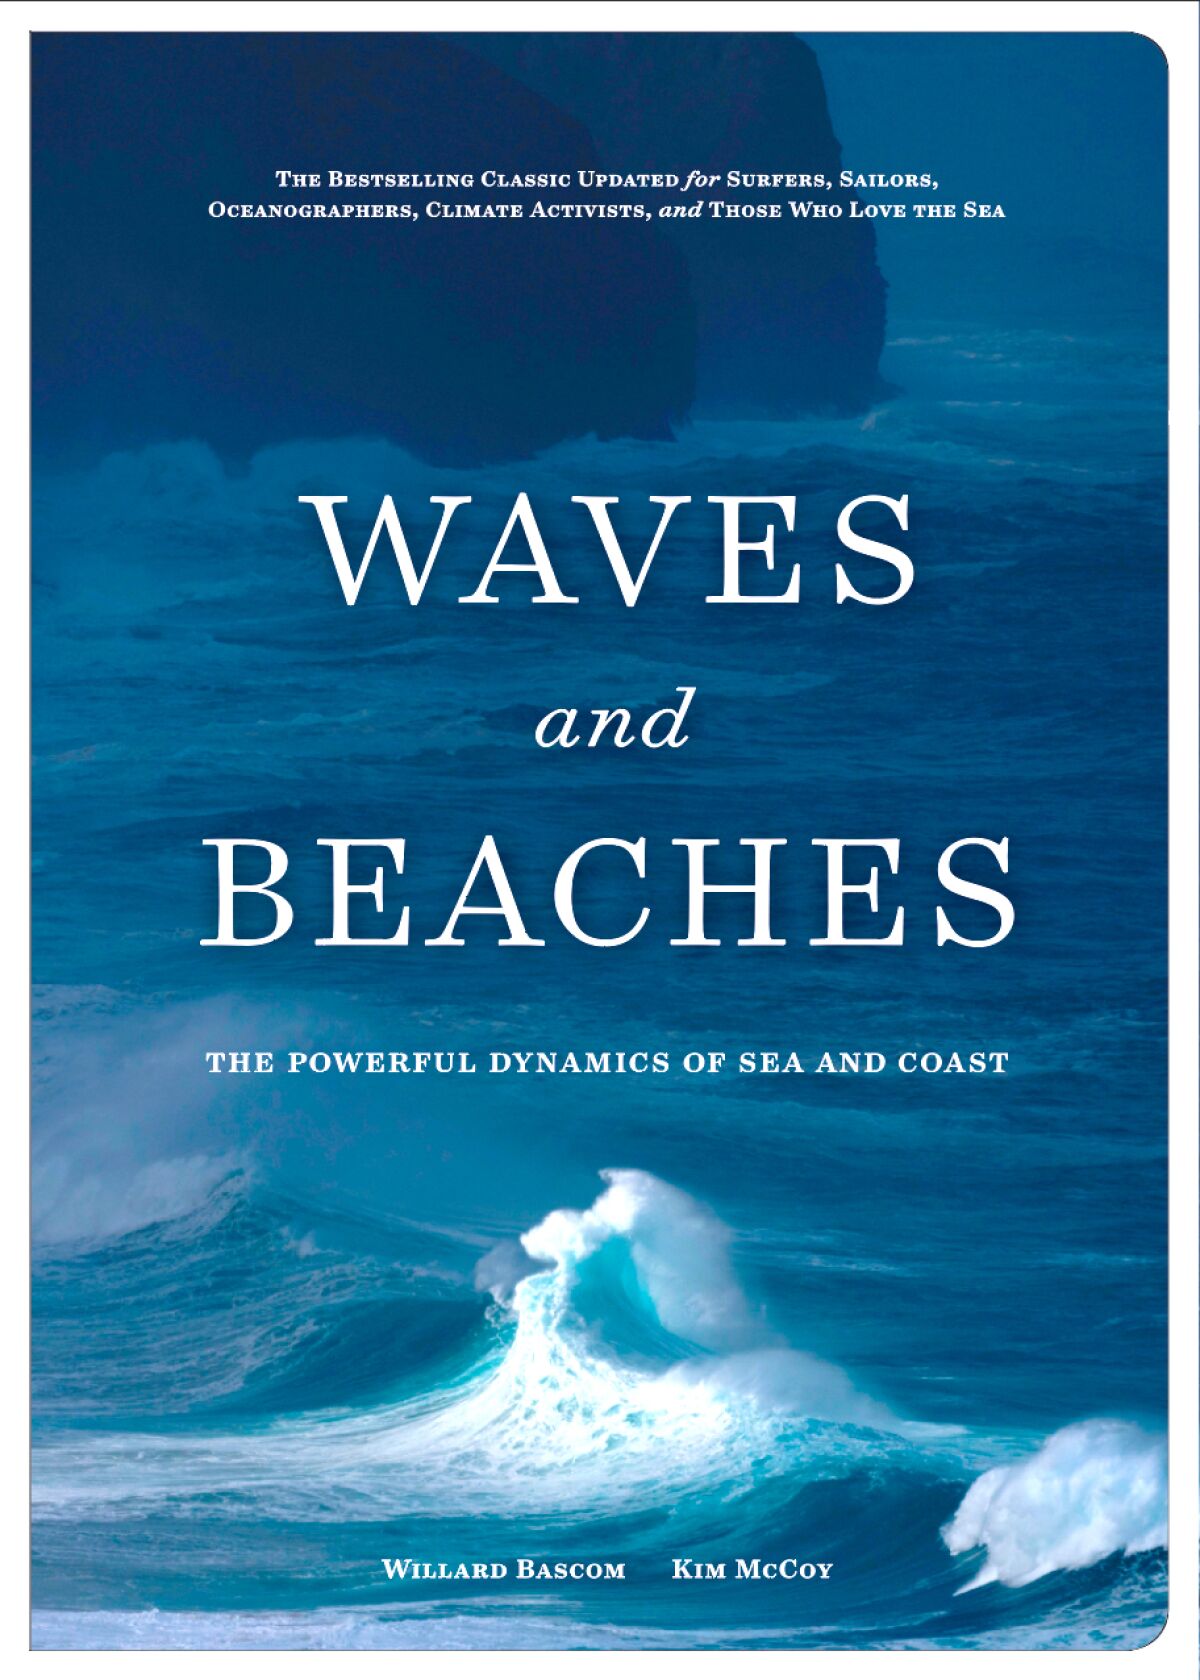 Kim McCoy will discuss his updated edition of Willard Bascom’s book “Waves and Beaches" at D.G. Wills Books in La Jolla.